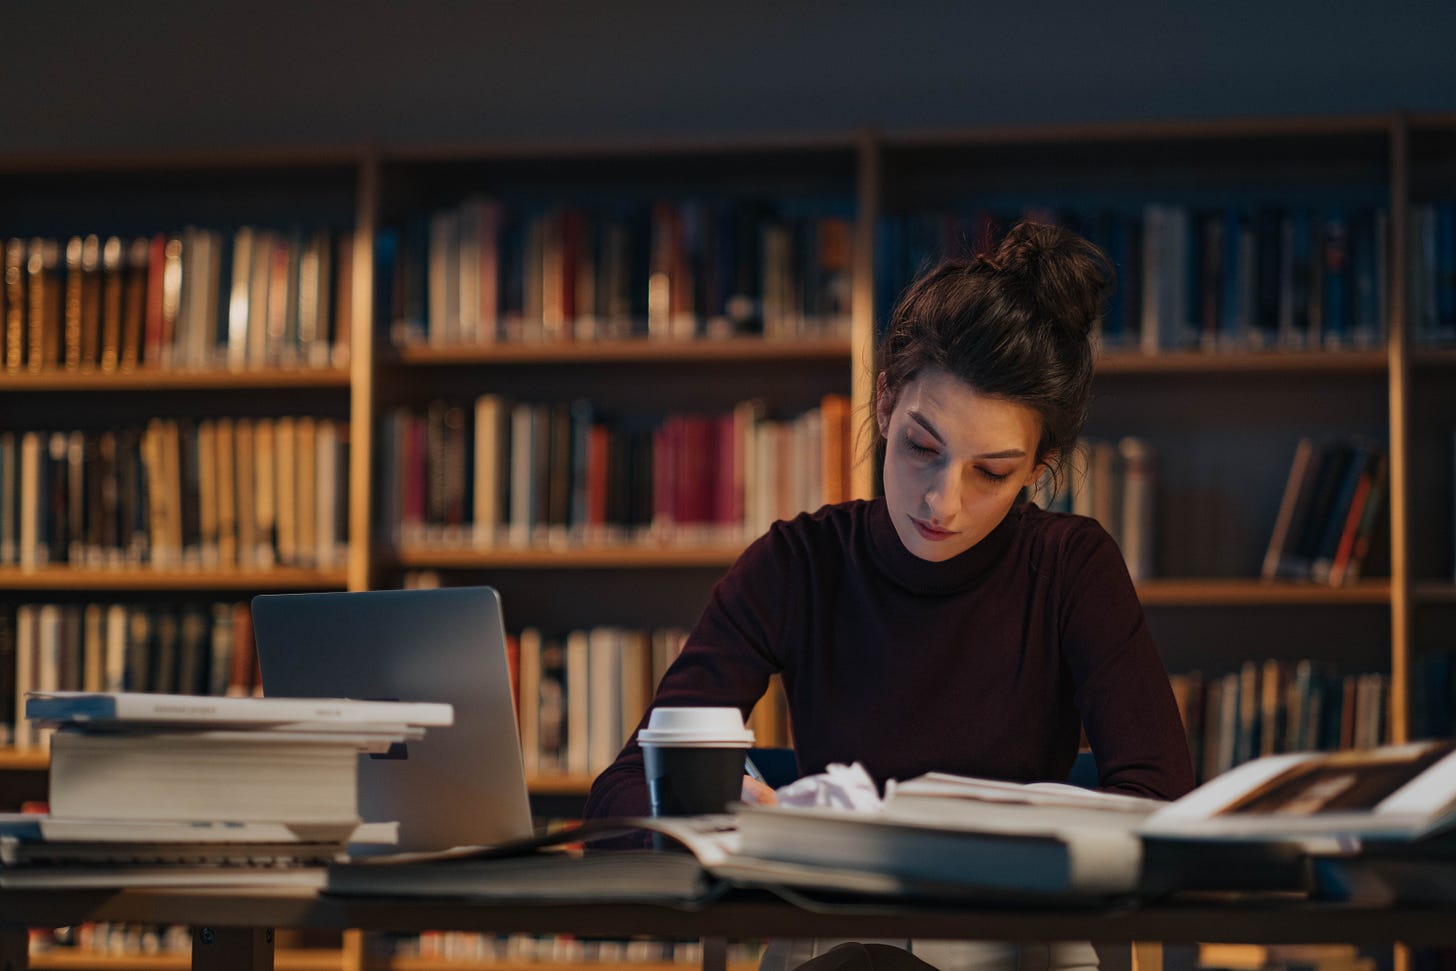 woman in library studying on desk with many books